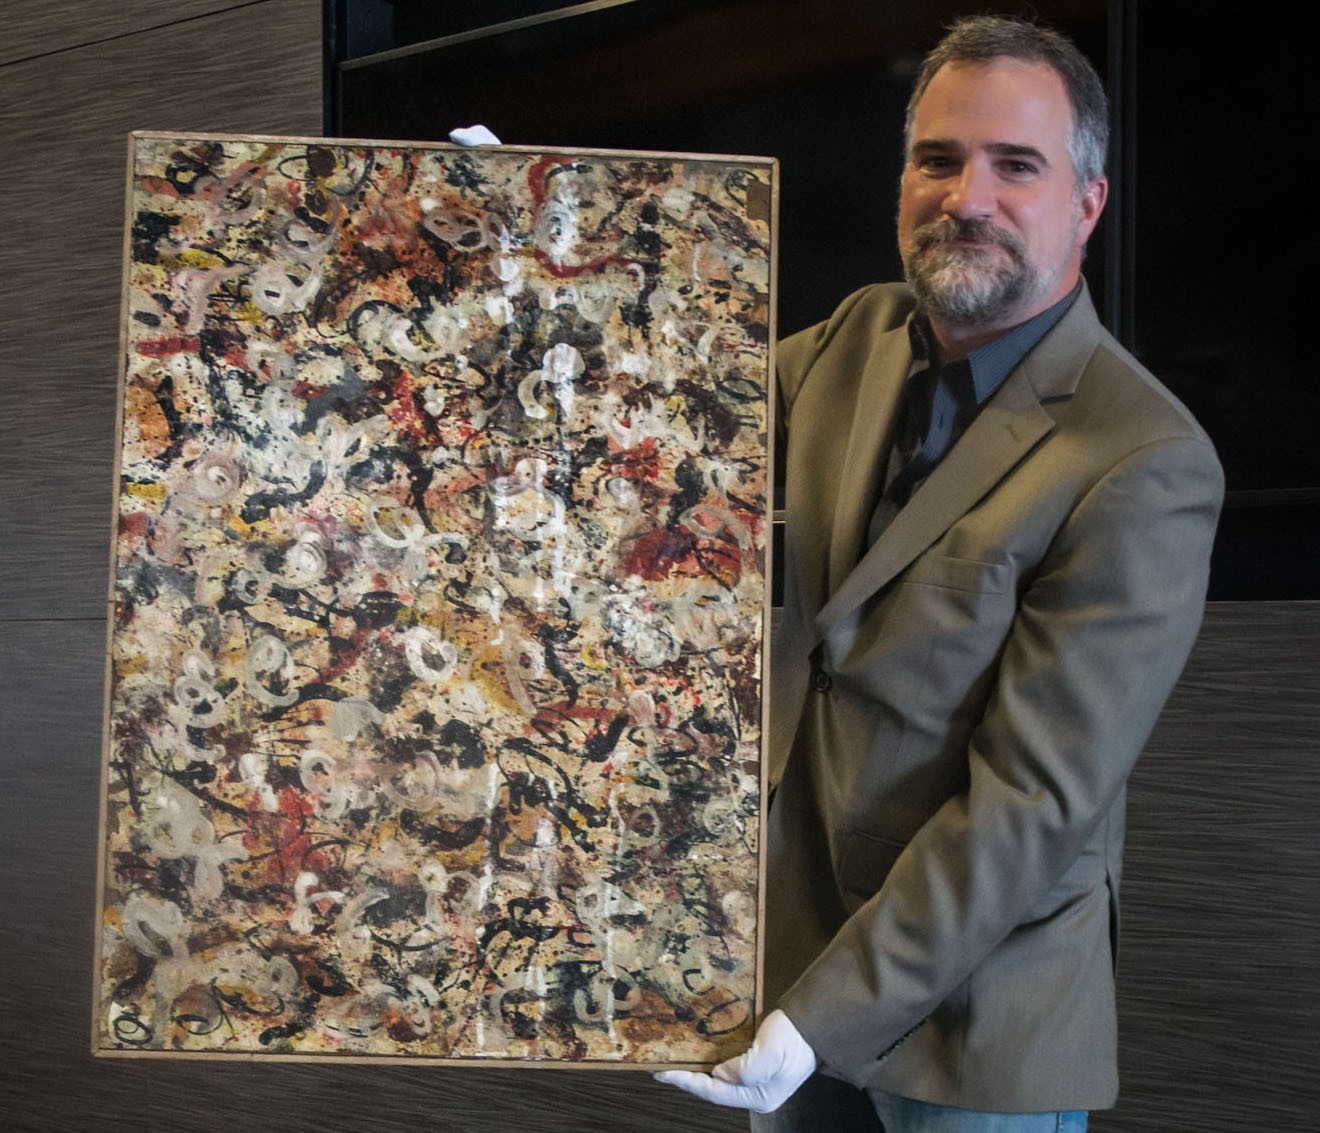 Josh Levine, owner and CEO of J. Levine Auction & Appraisal, with a painting he attributes to Jackson Pollock.